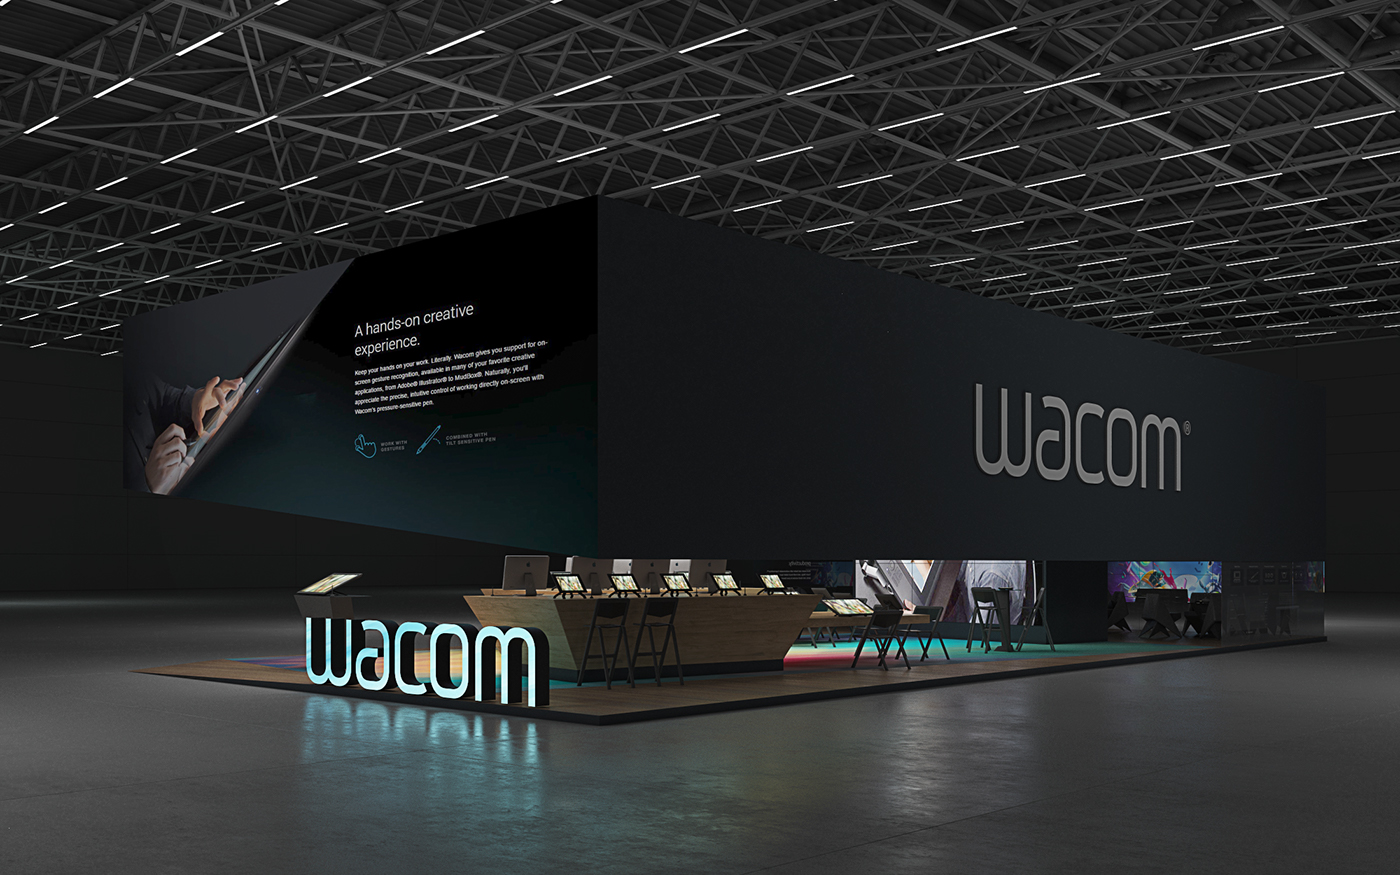 wacom GMstanddesign RomanGeviuk Exhibition  exhibitionstands booth design chairs Technology innovation